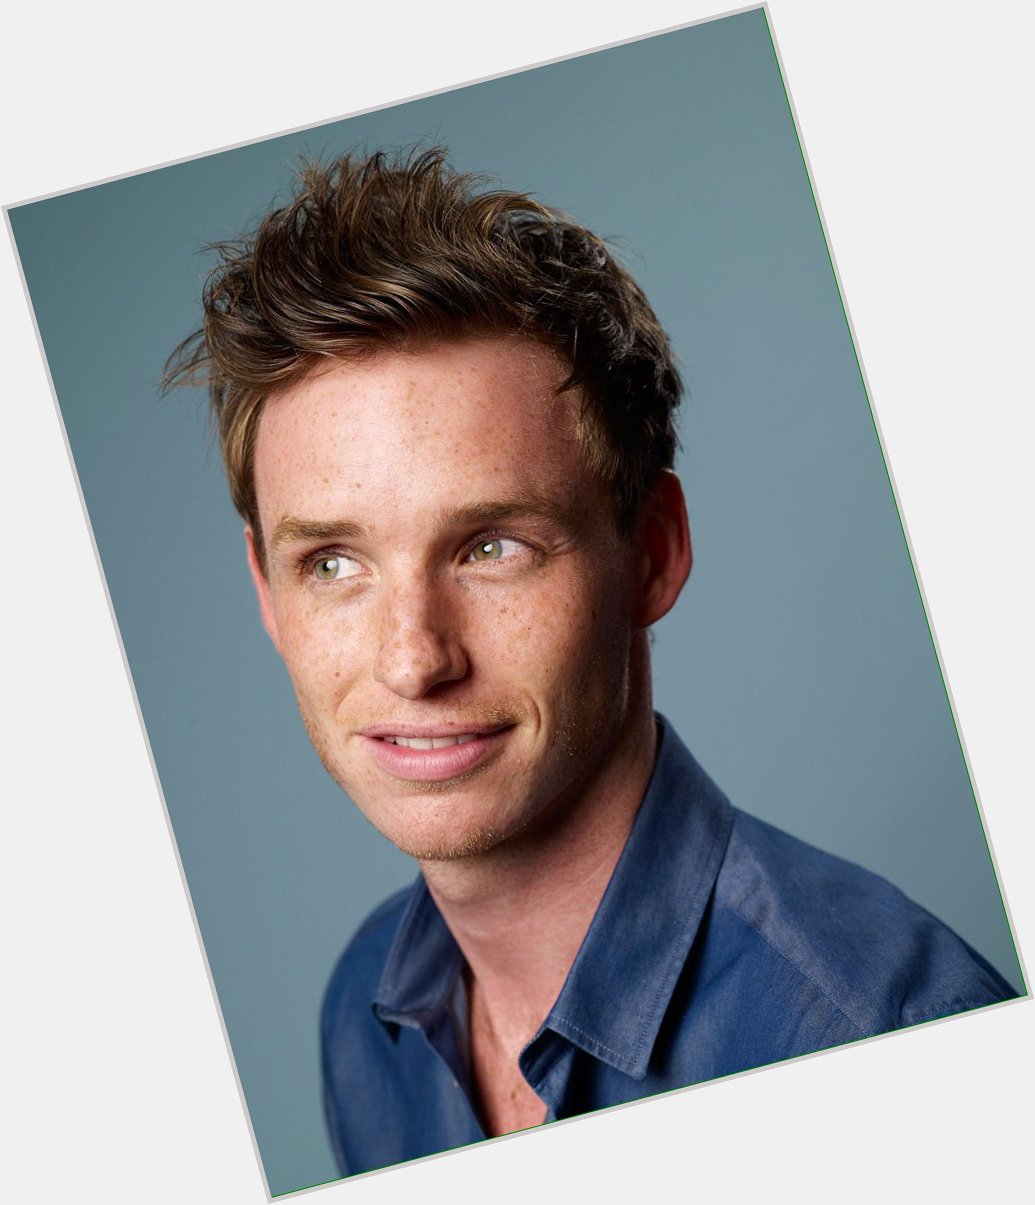 Happy birthday eddie redmayne
-adorable and precious
-amazing and talented actor
-AMAZING SINGER
I LOVE HIS FRECKLES 